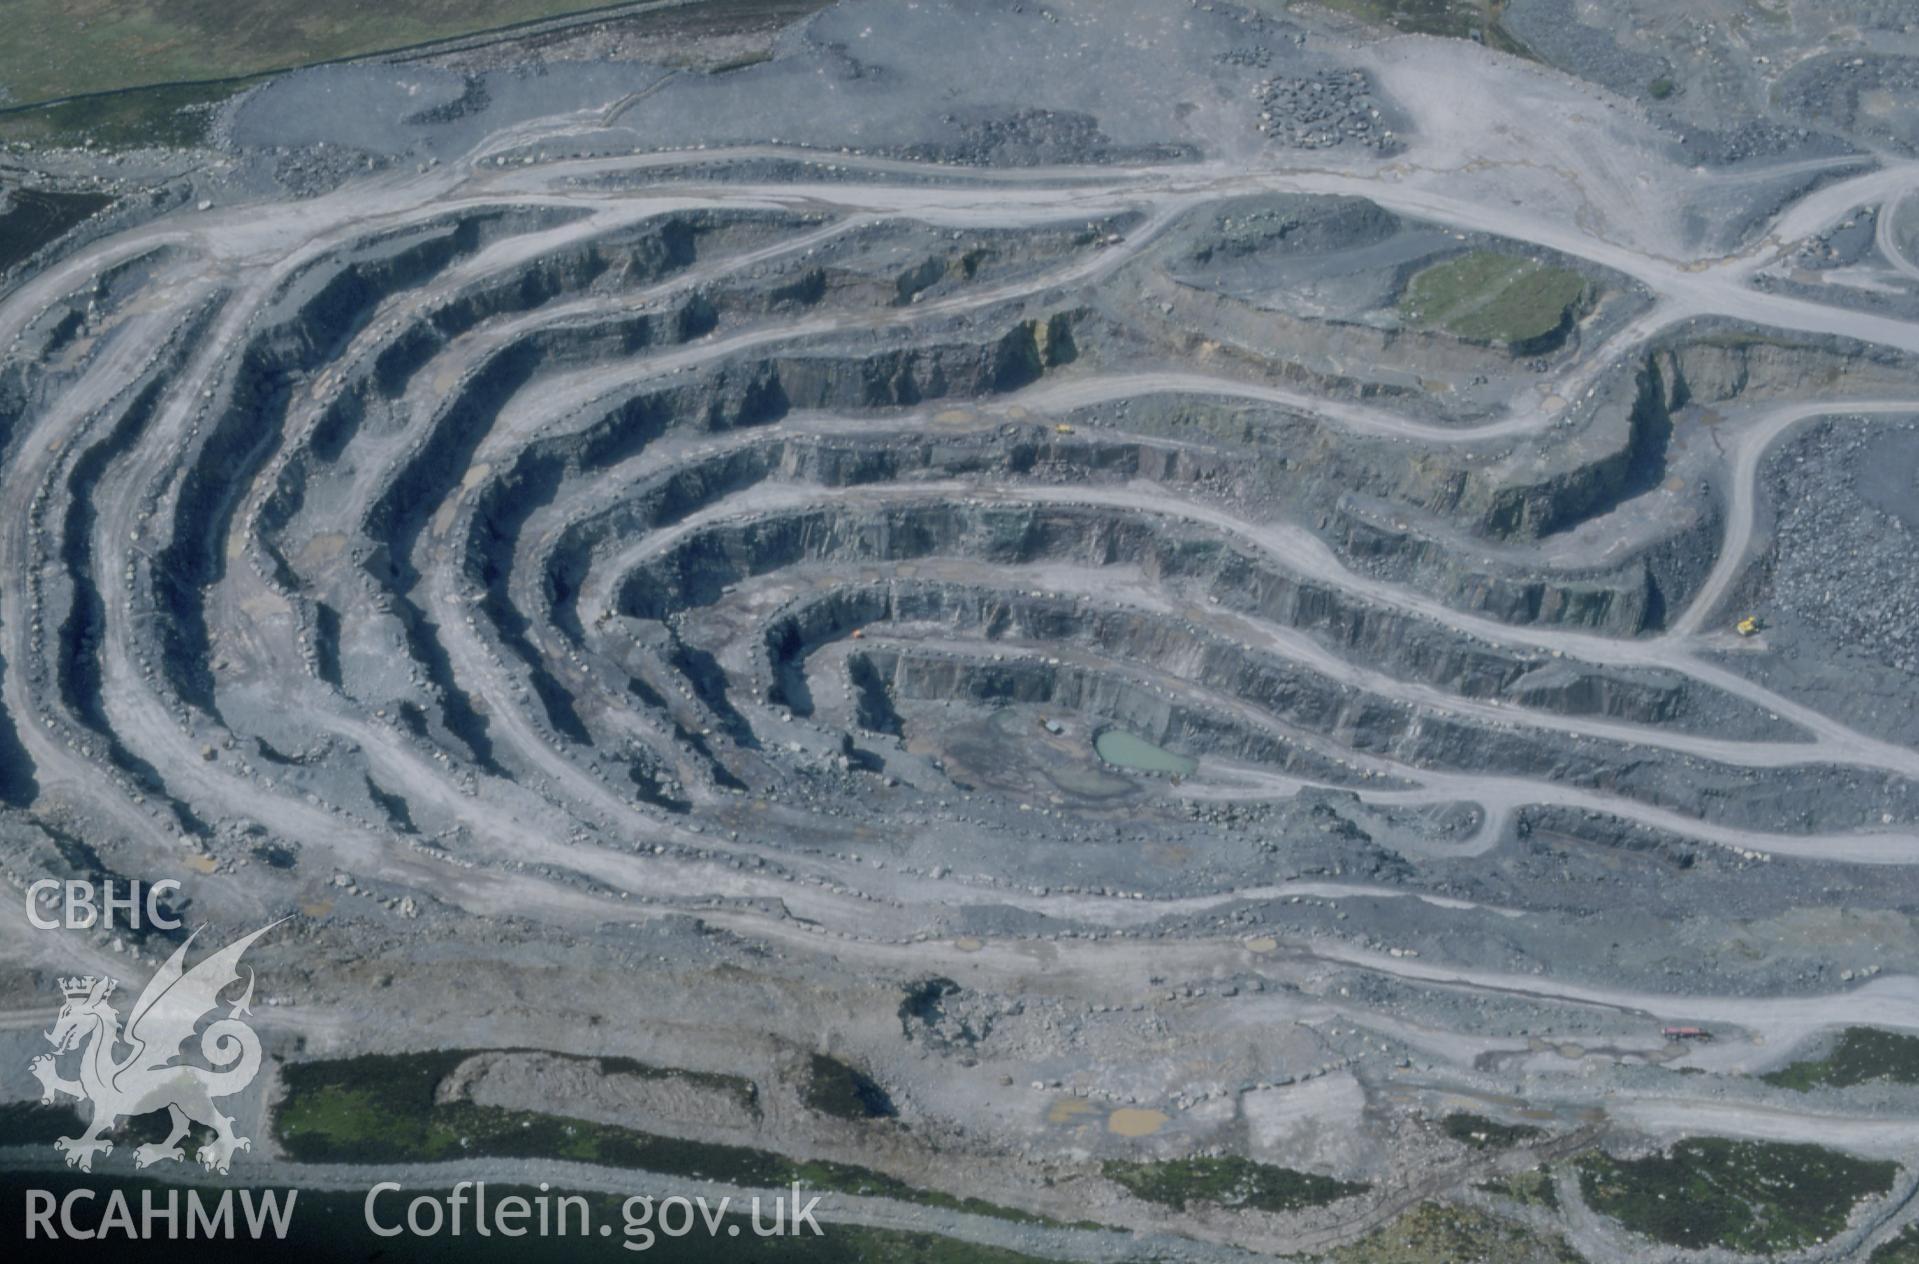 Slide of RCAHMW colour oblique aerial photograph of Penrhyn Slate Quarry, taken by C.R. Musson, 2/5/1994.